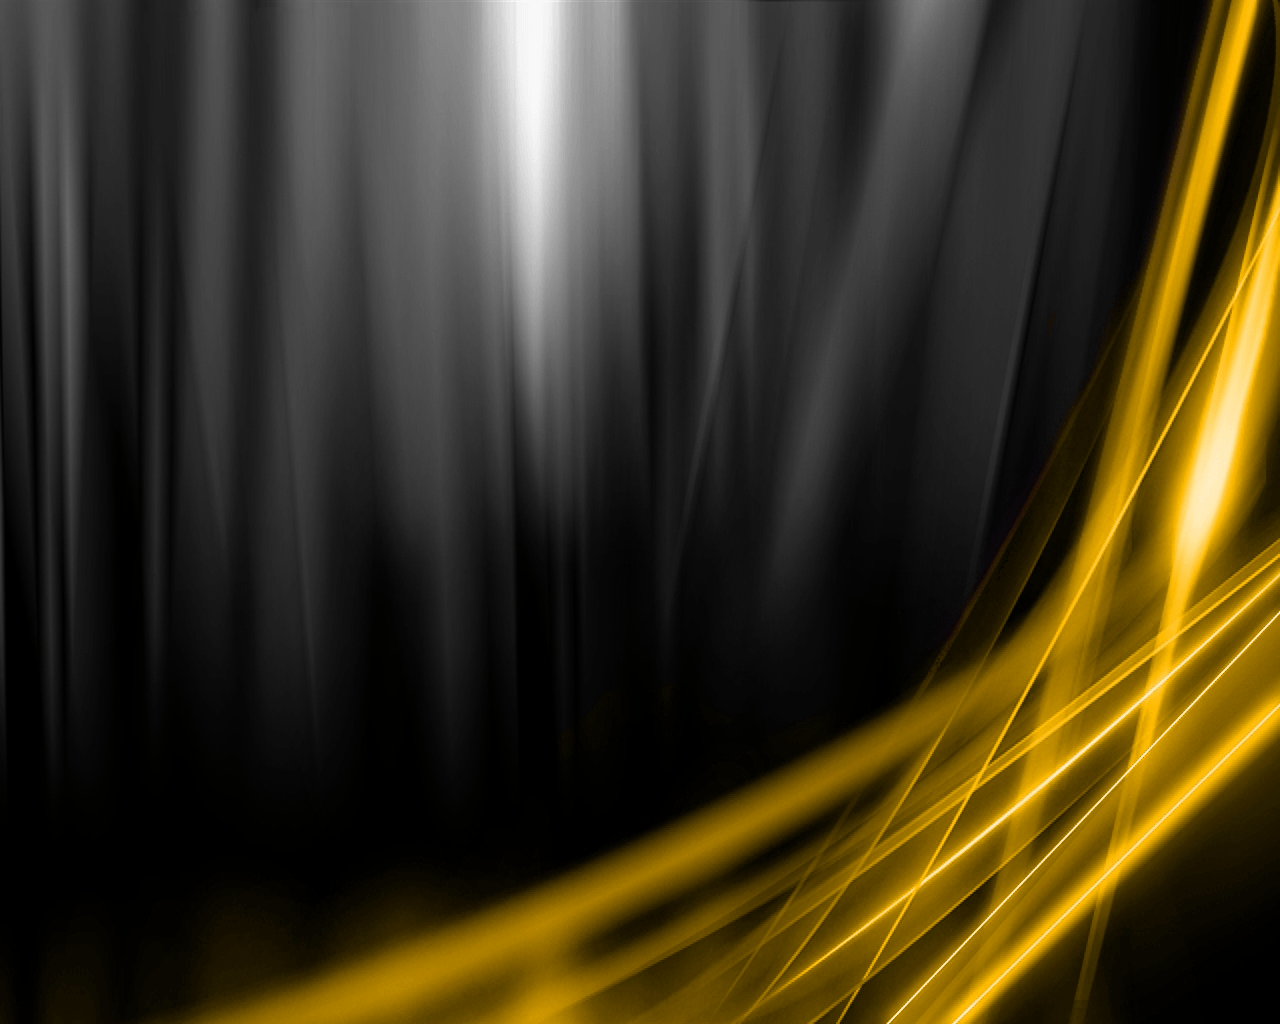 Gallery For gt Black And Gold Wallpaper